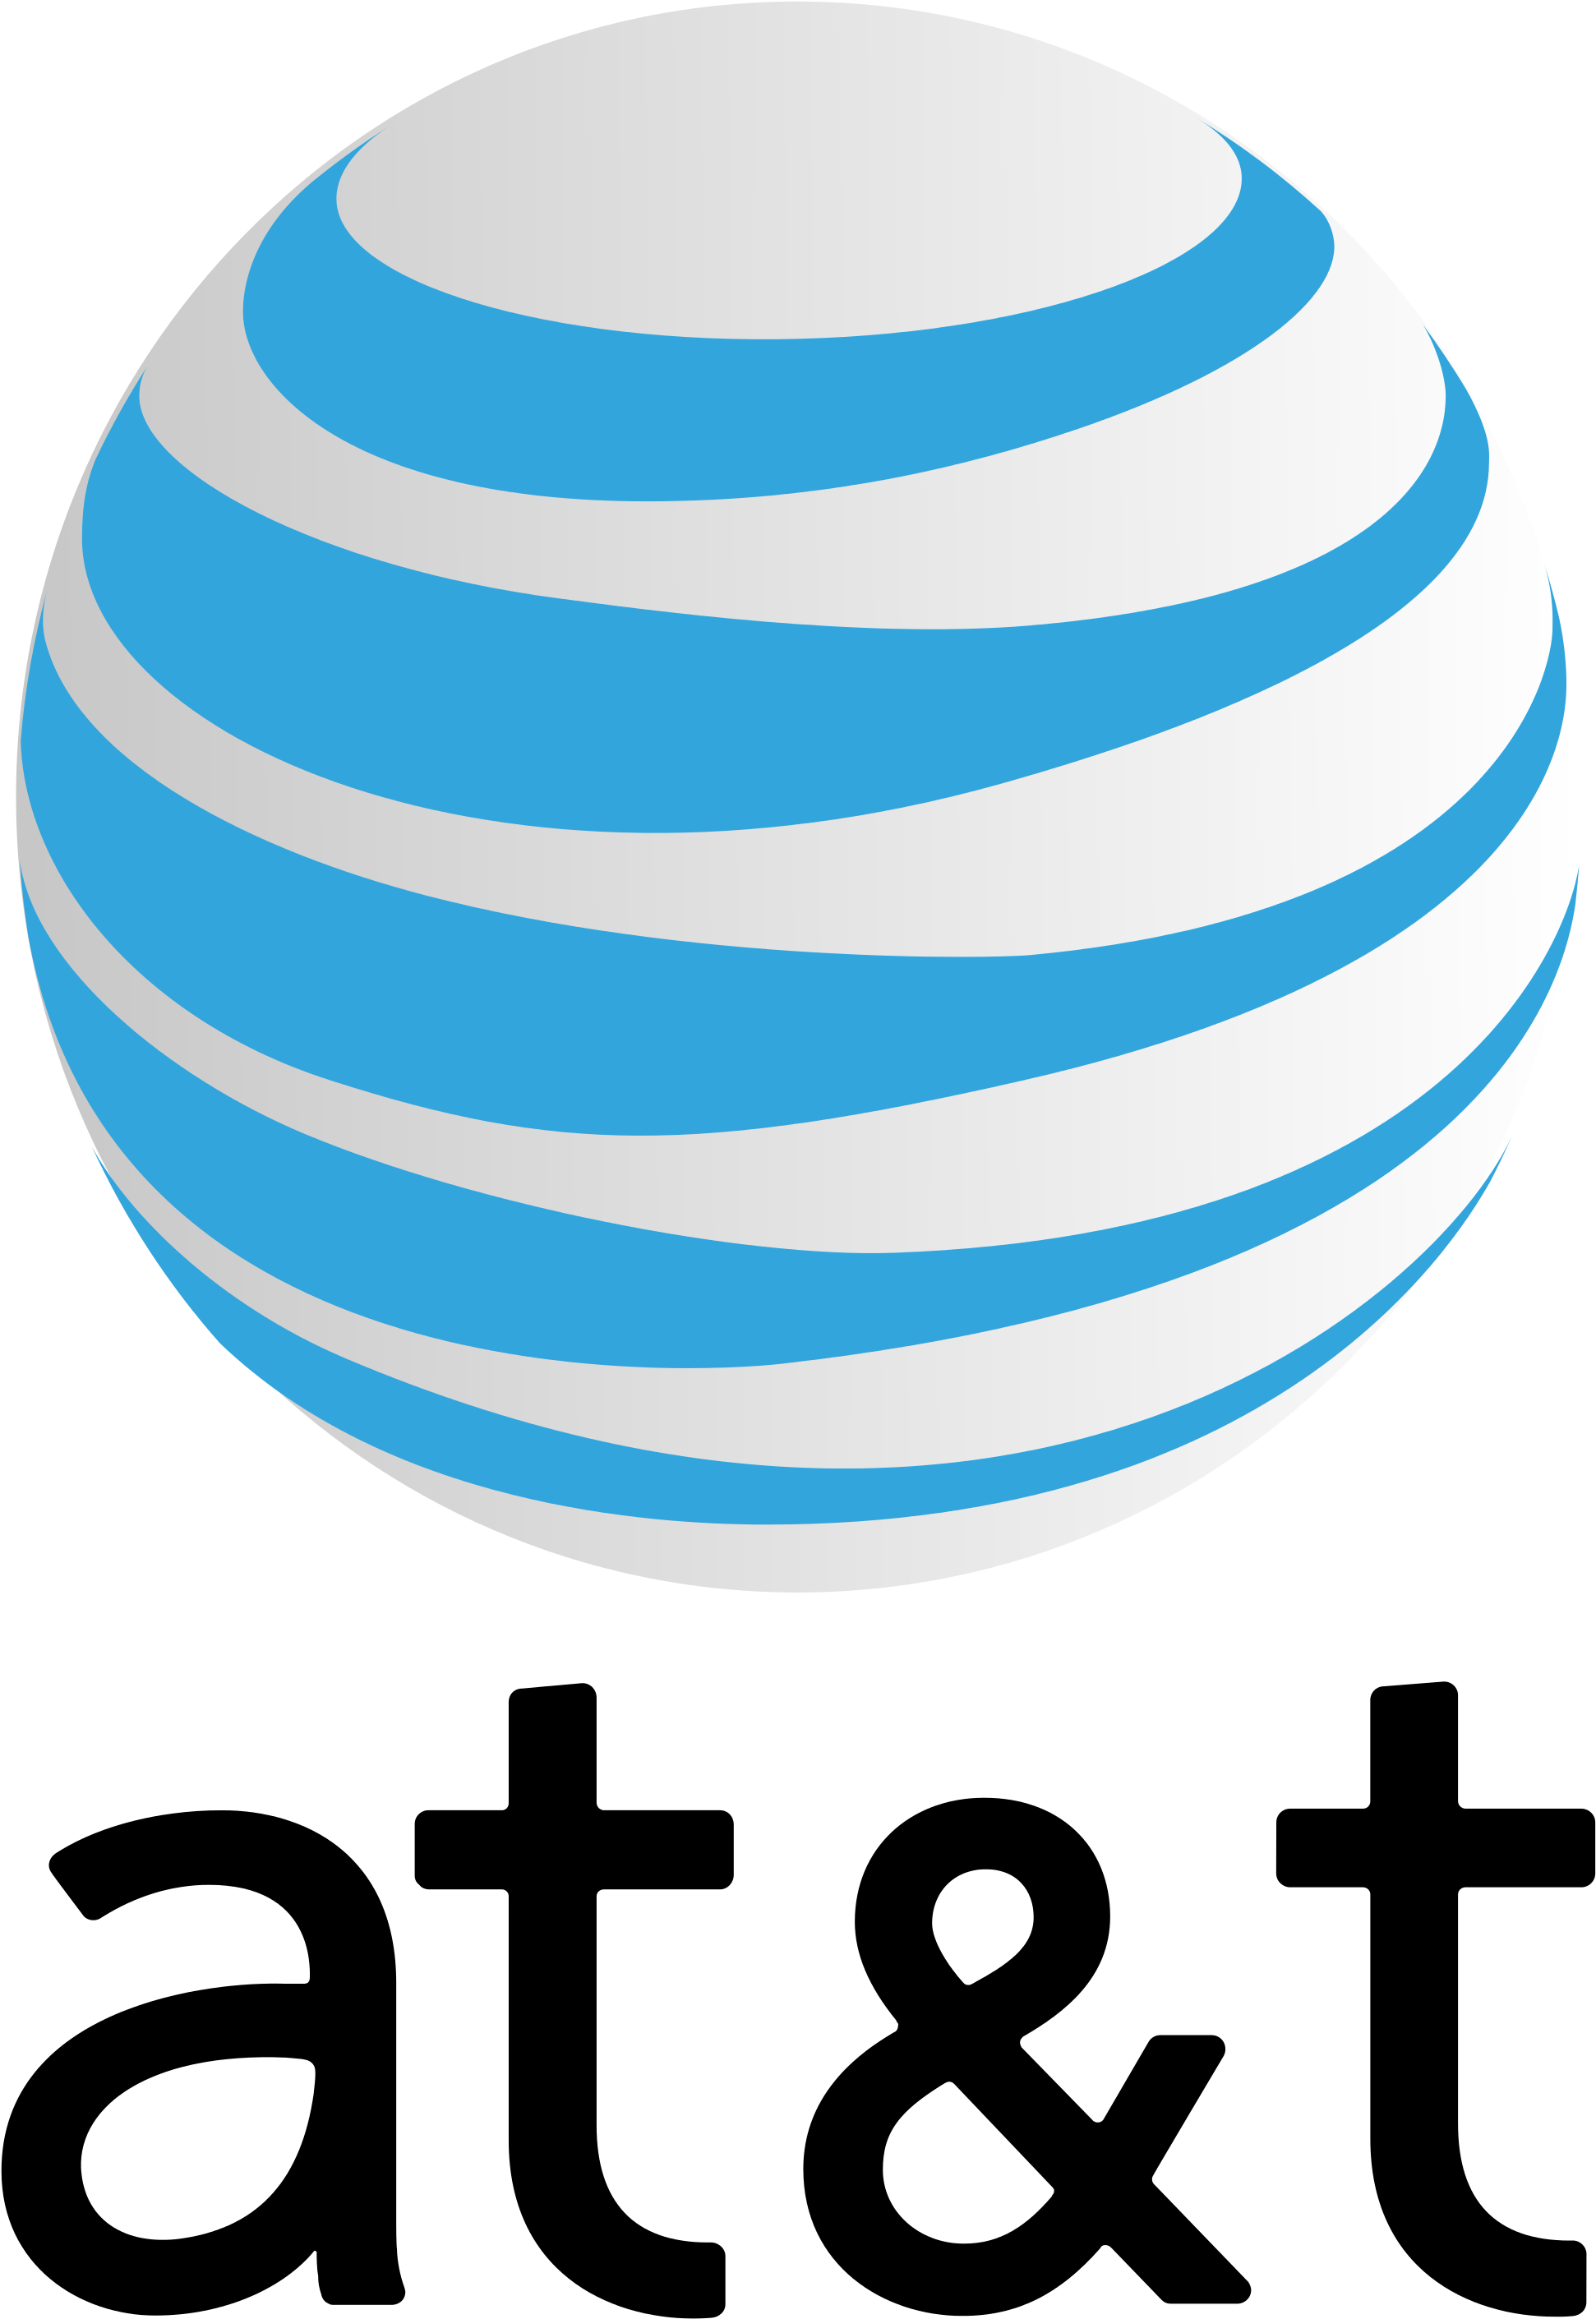 Only At&t Iphone Carrier Factory Unlock Service - At&t Mobile (2000x2919)